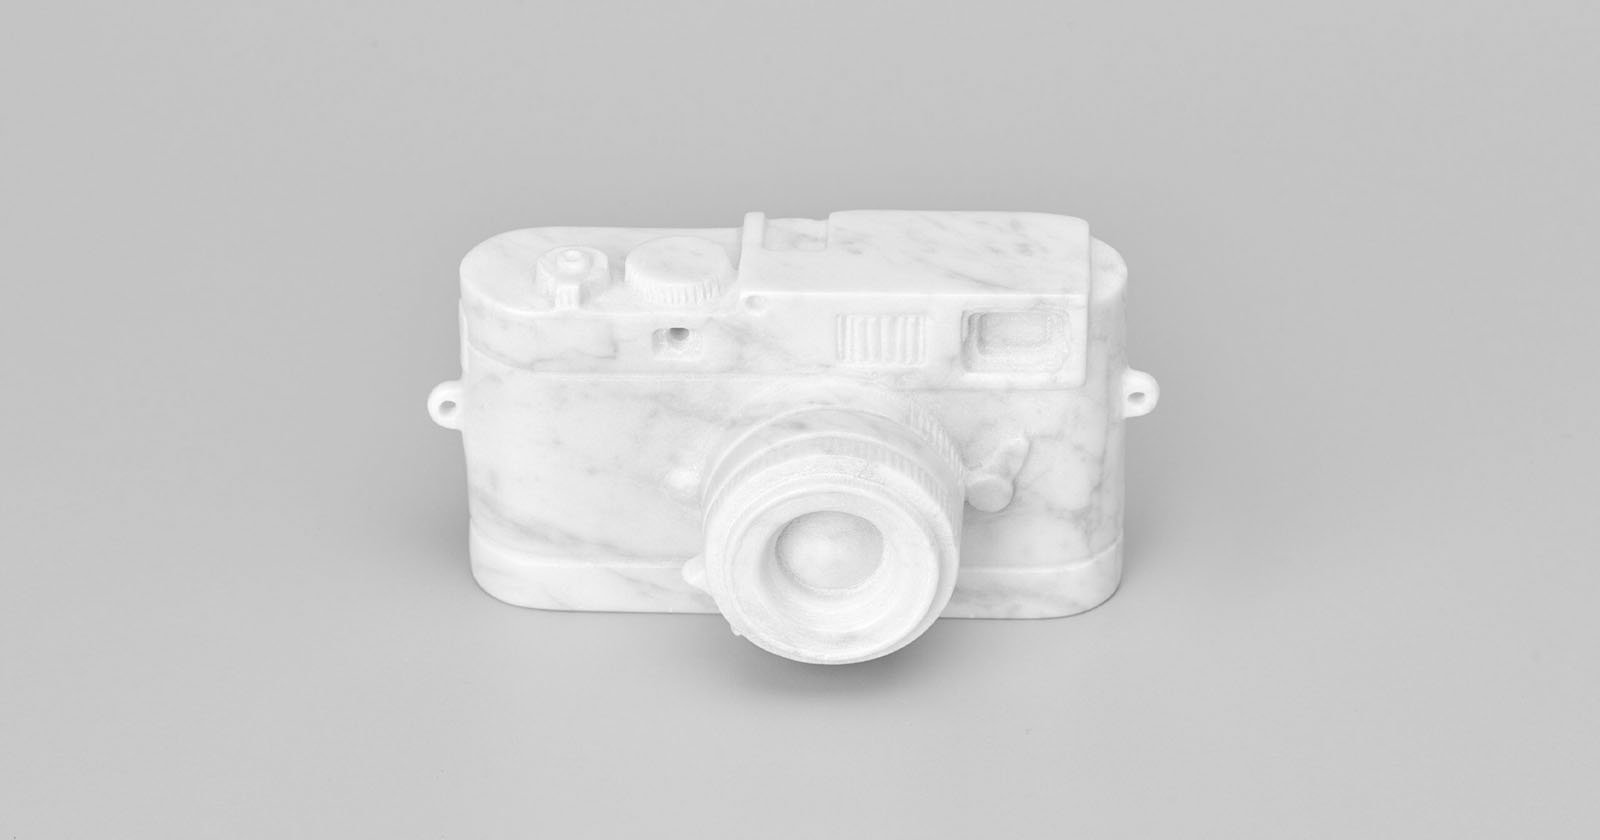  leica store selling one-of-a-kind marble camera 